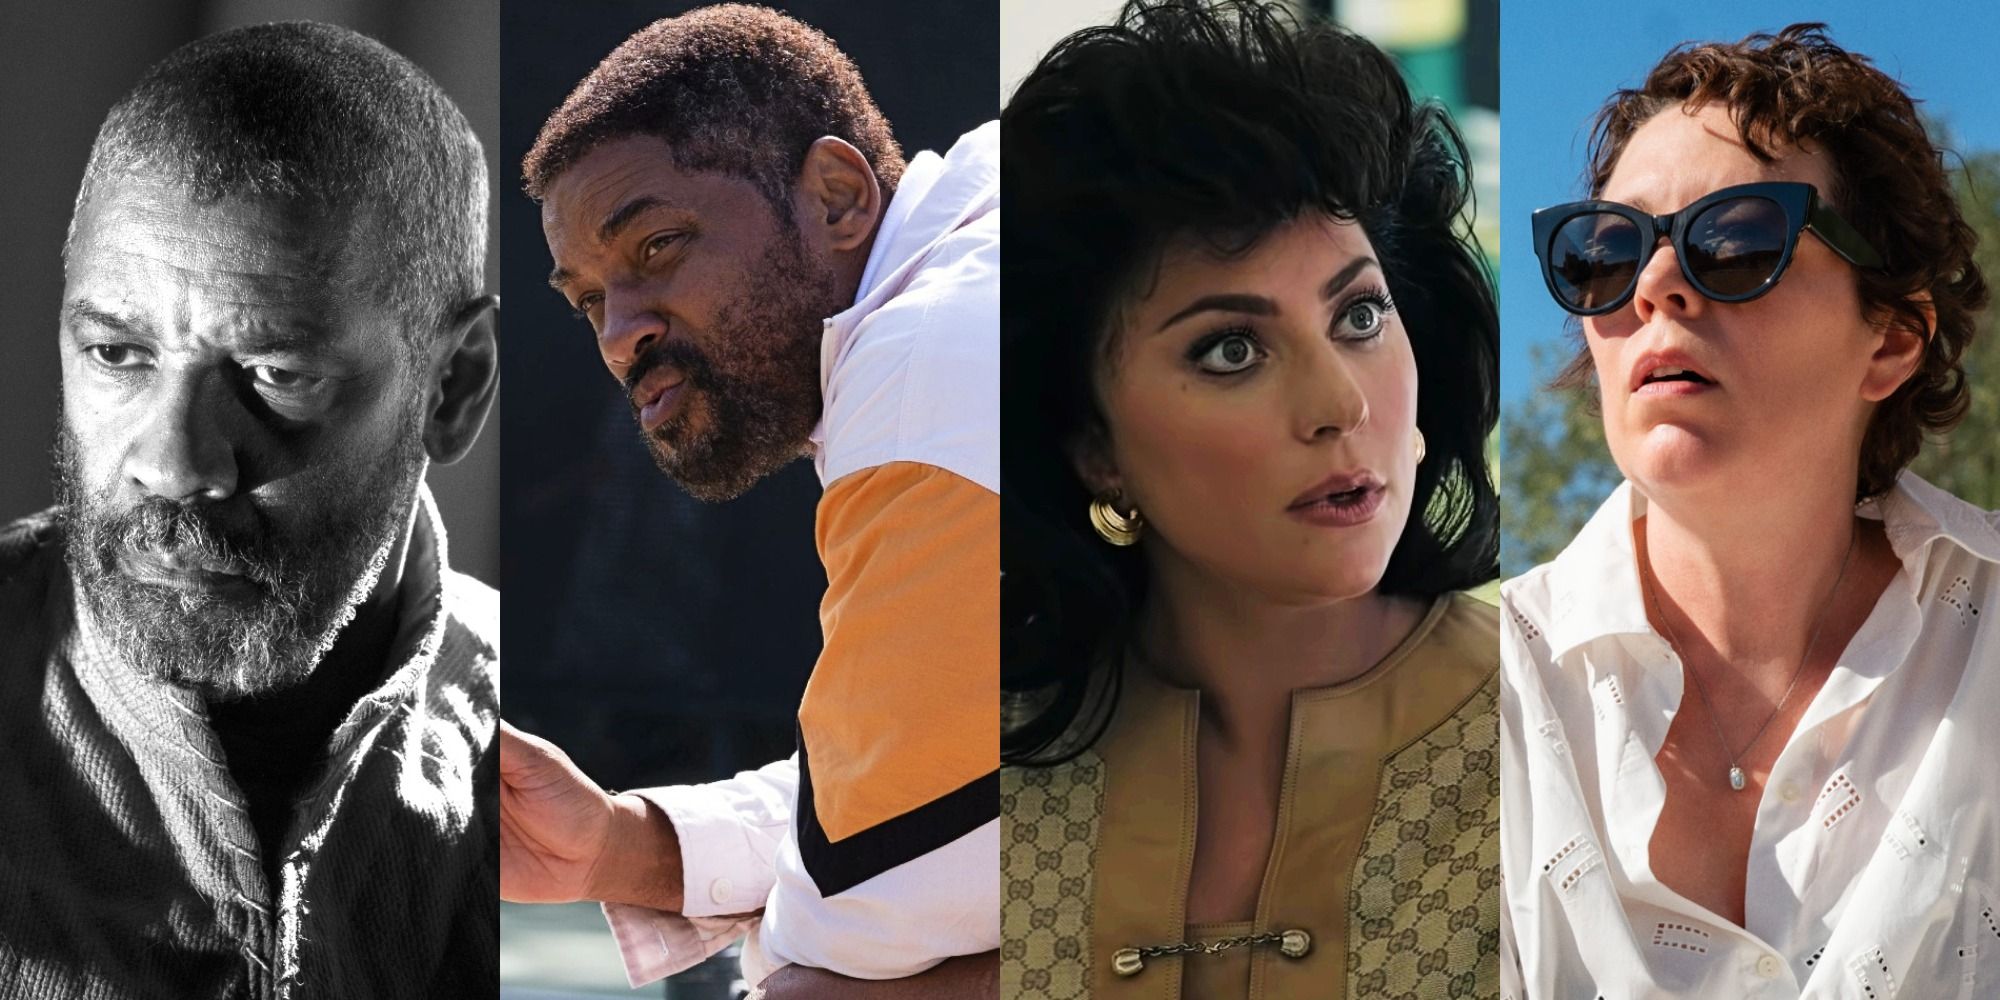 Where to watch all the 2021 Oscar nominees - GoldDerby